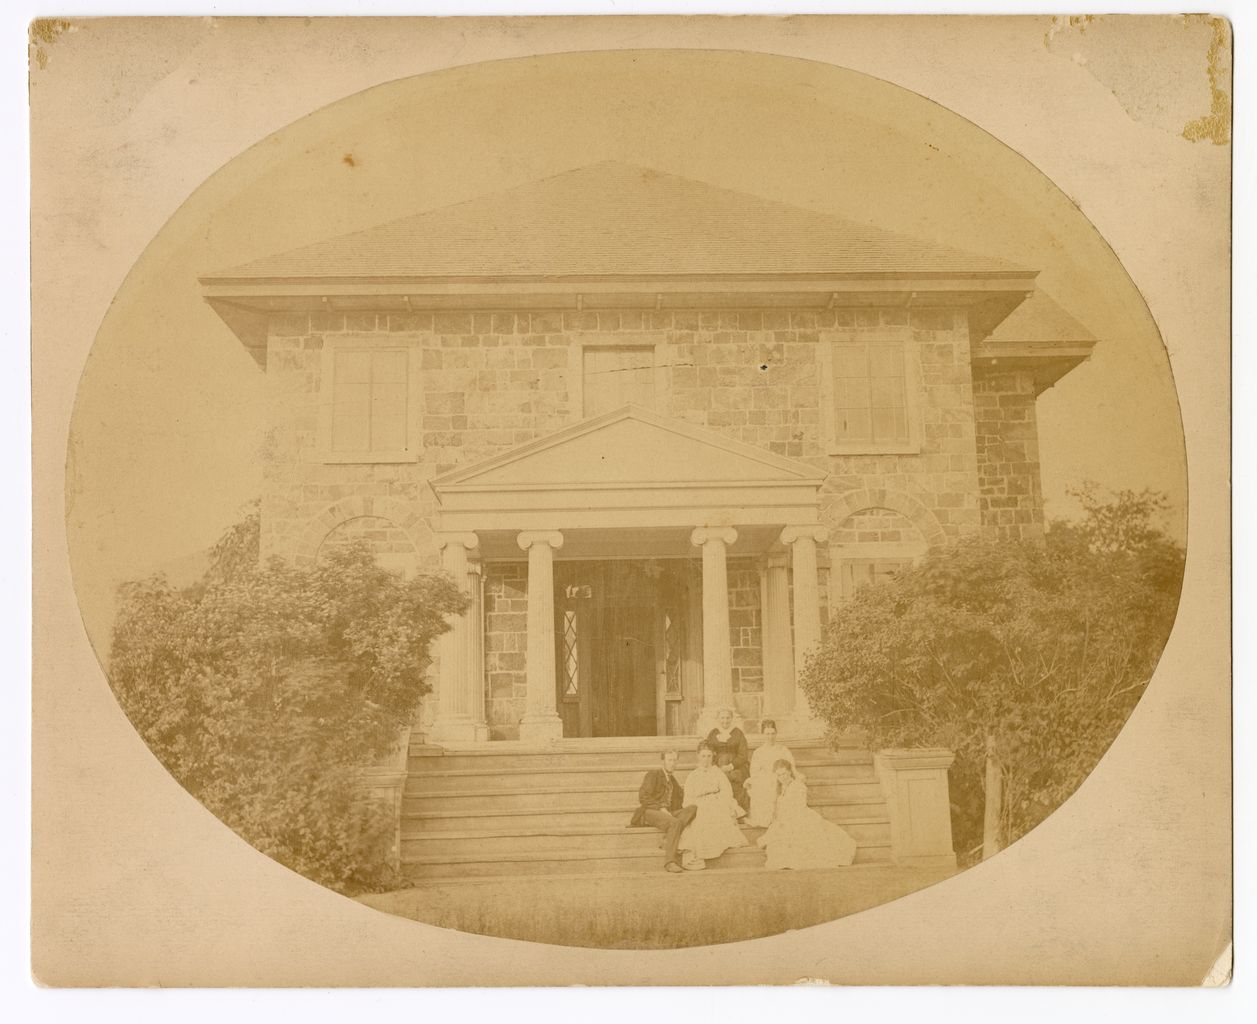 Black and white photograph of the facade of Grantham Hall, a large two-story stone house with a porch supported by columns and family members posing on the steps.